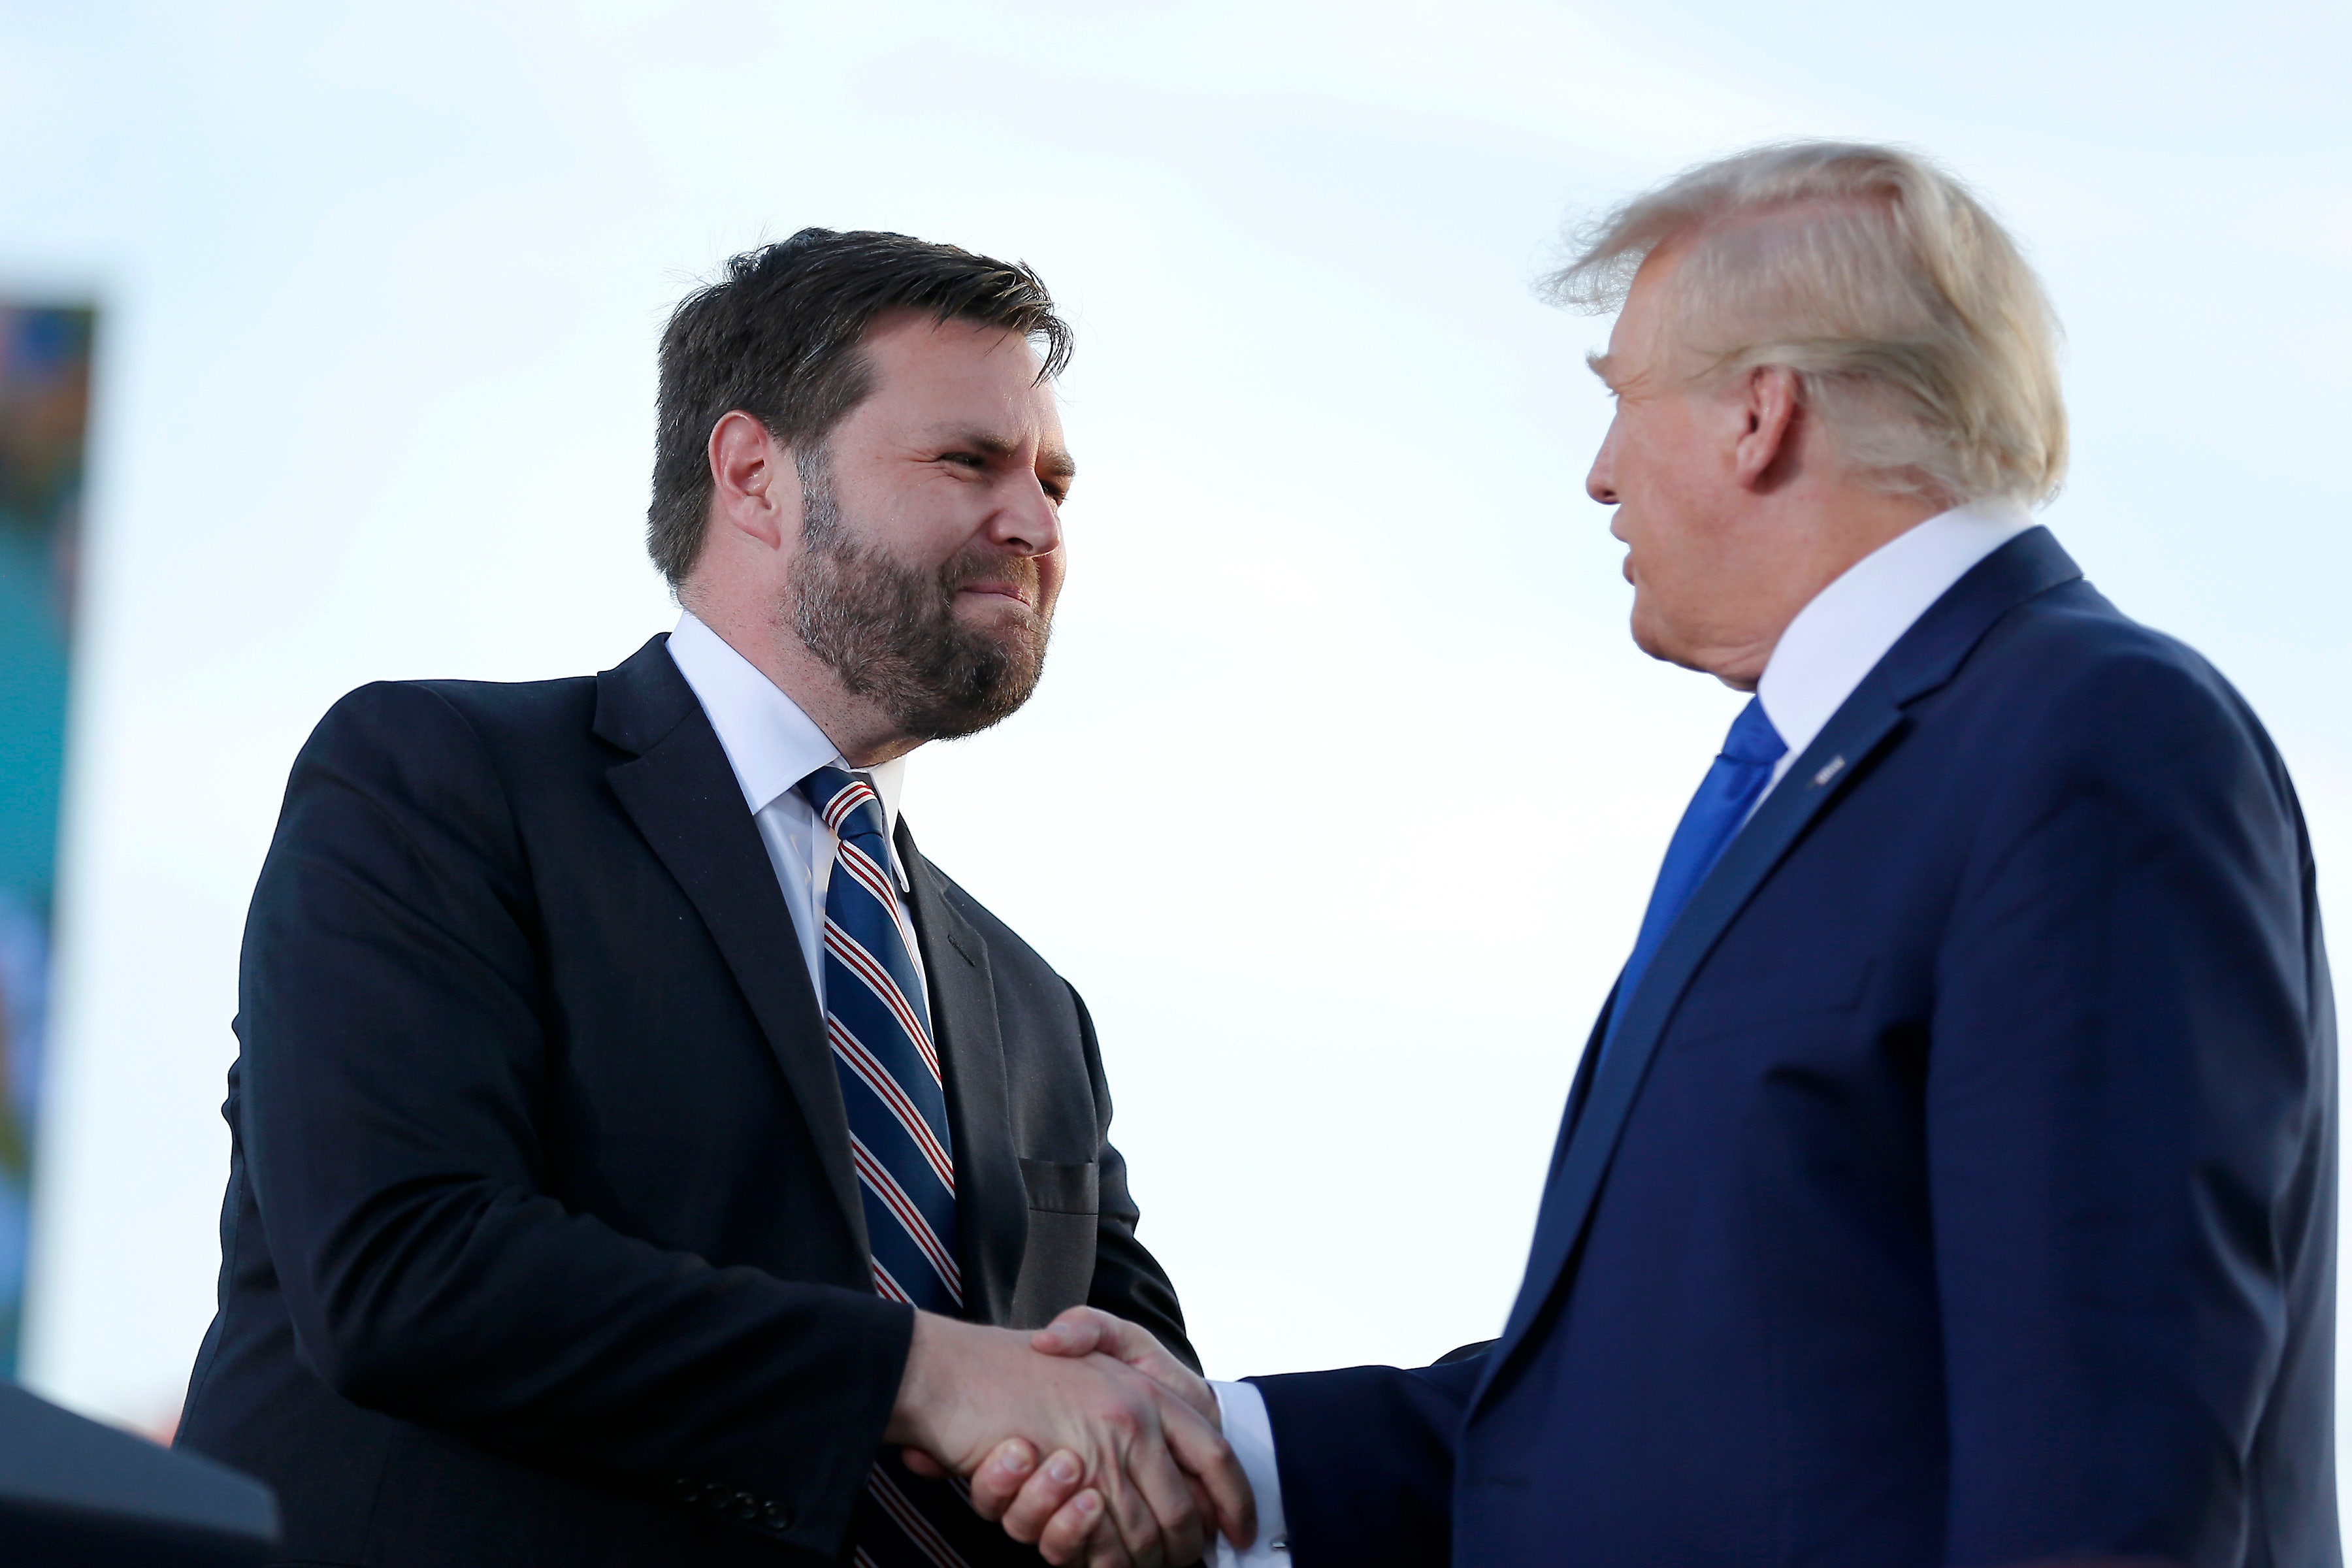 JD Vance and Tim Ryan wage battle of the populists in race for Ohio’s open Senate seat – Fox News